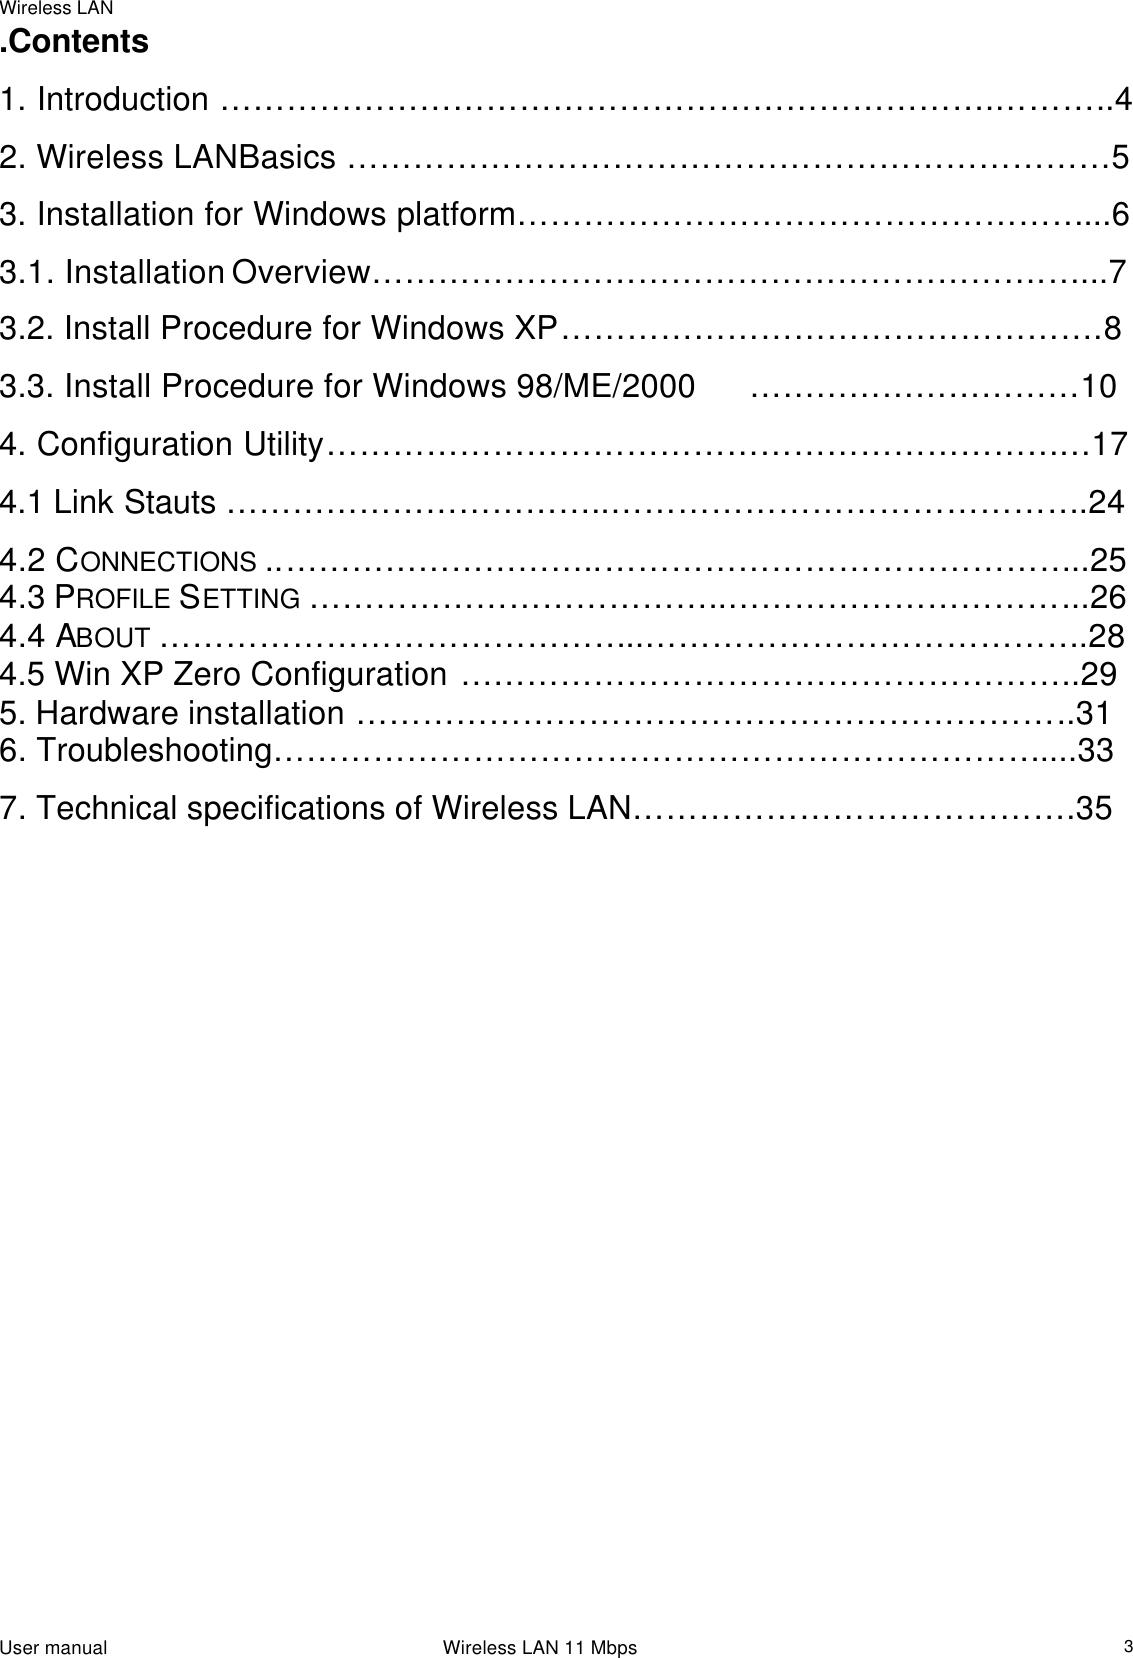 Wireless LAN                                                                                                                                                                                                  User manual                                                                 Wireless LAN 11 Mbps  3.Contents 1. Introduction …………………………………………………………….………..4  2. Wireless LANBasics ……………………………………………………………5 3. Installation for Windows platform……………………………………………...6 3.1. Installation Overview…………………………………………………….…...7 3.2. Install Procedure for Windows XP………………………………………….8 3.3. Install Procedure for Windows 98/ME/2000 …………………………10 4. Configuration Utility……………………………………………………………17 4.1 Link Stauts ……………………………..…………………………………….24 4.2 CONNECTIONS ..………………………..……………………………………..25  4.3 PROFILE SETTING ………………………………..…………………………...26  4.4 ABOUT ……………………………………..………………………………….28  4.5 Win XP Zero Configuration ………………………………………………..29 5. Hardware installation ………………………………………………………..31 6. Troubleshooting……………………………………………………………....33 7. Technical specifications of Wireless LAN………………………………….35                                    